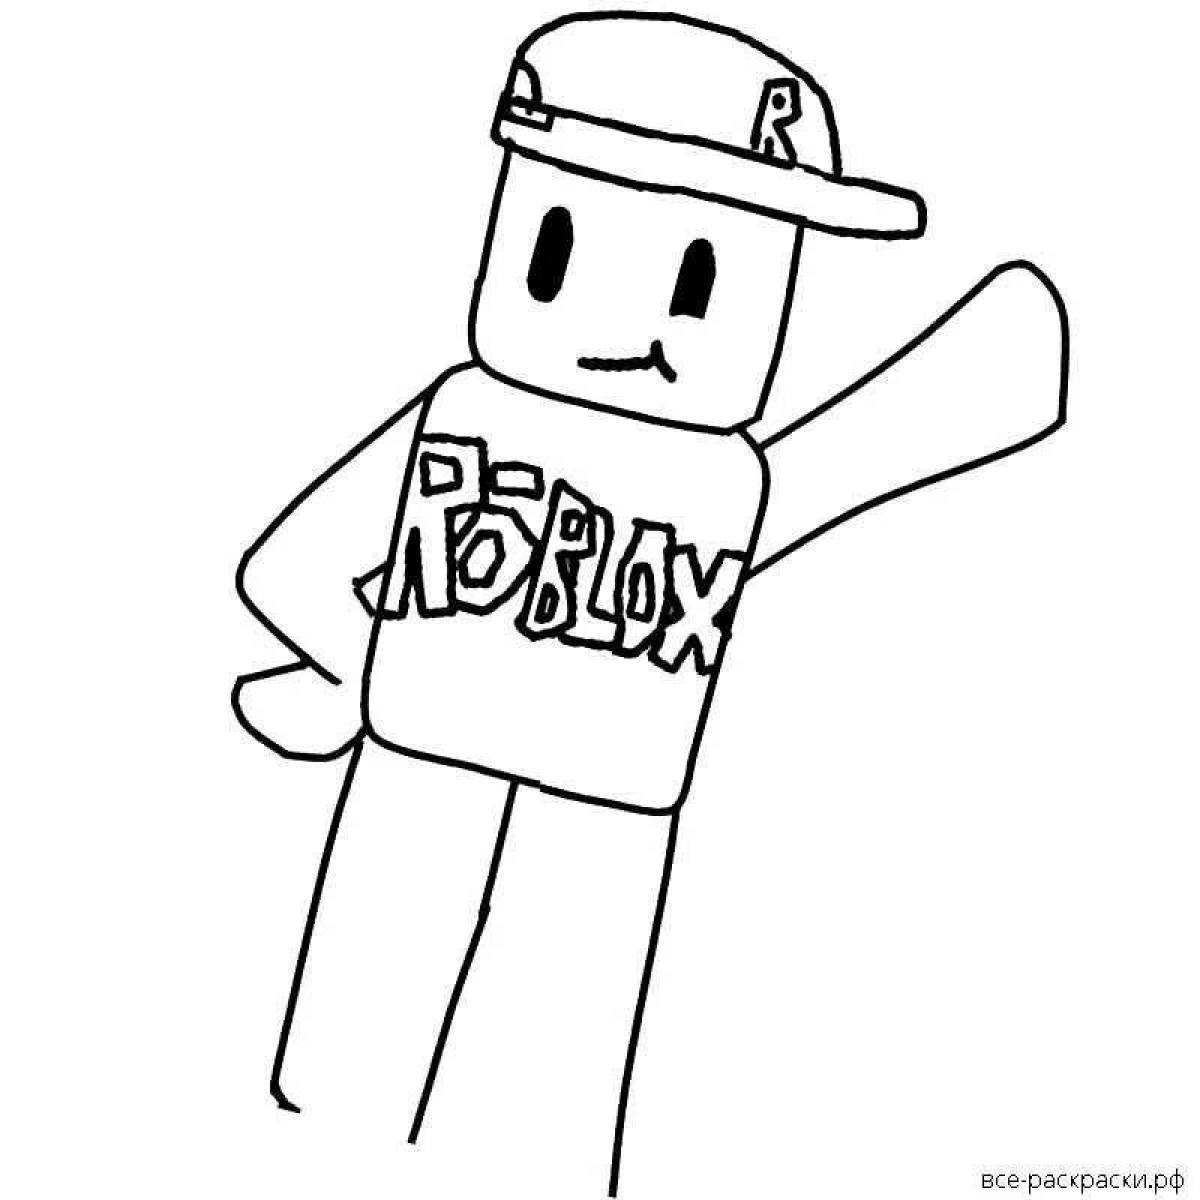 Roblox men exciting coloring book